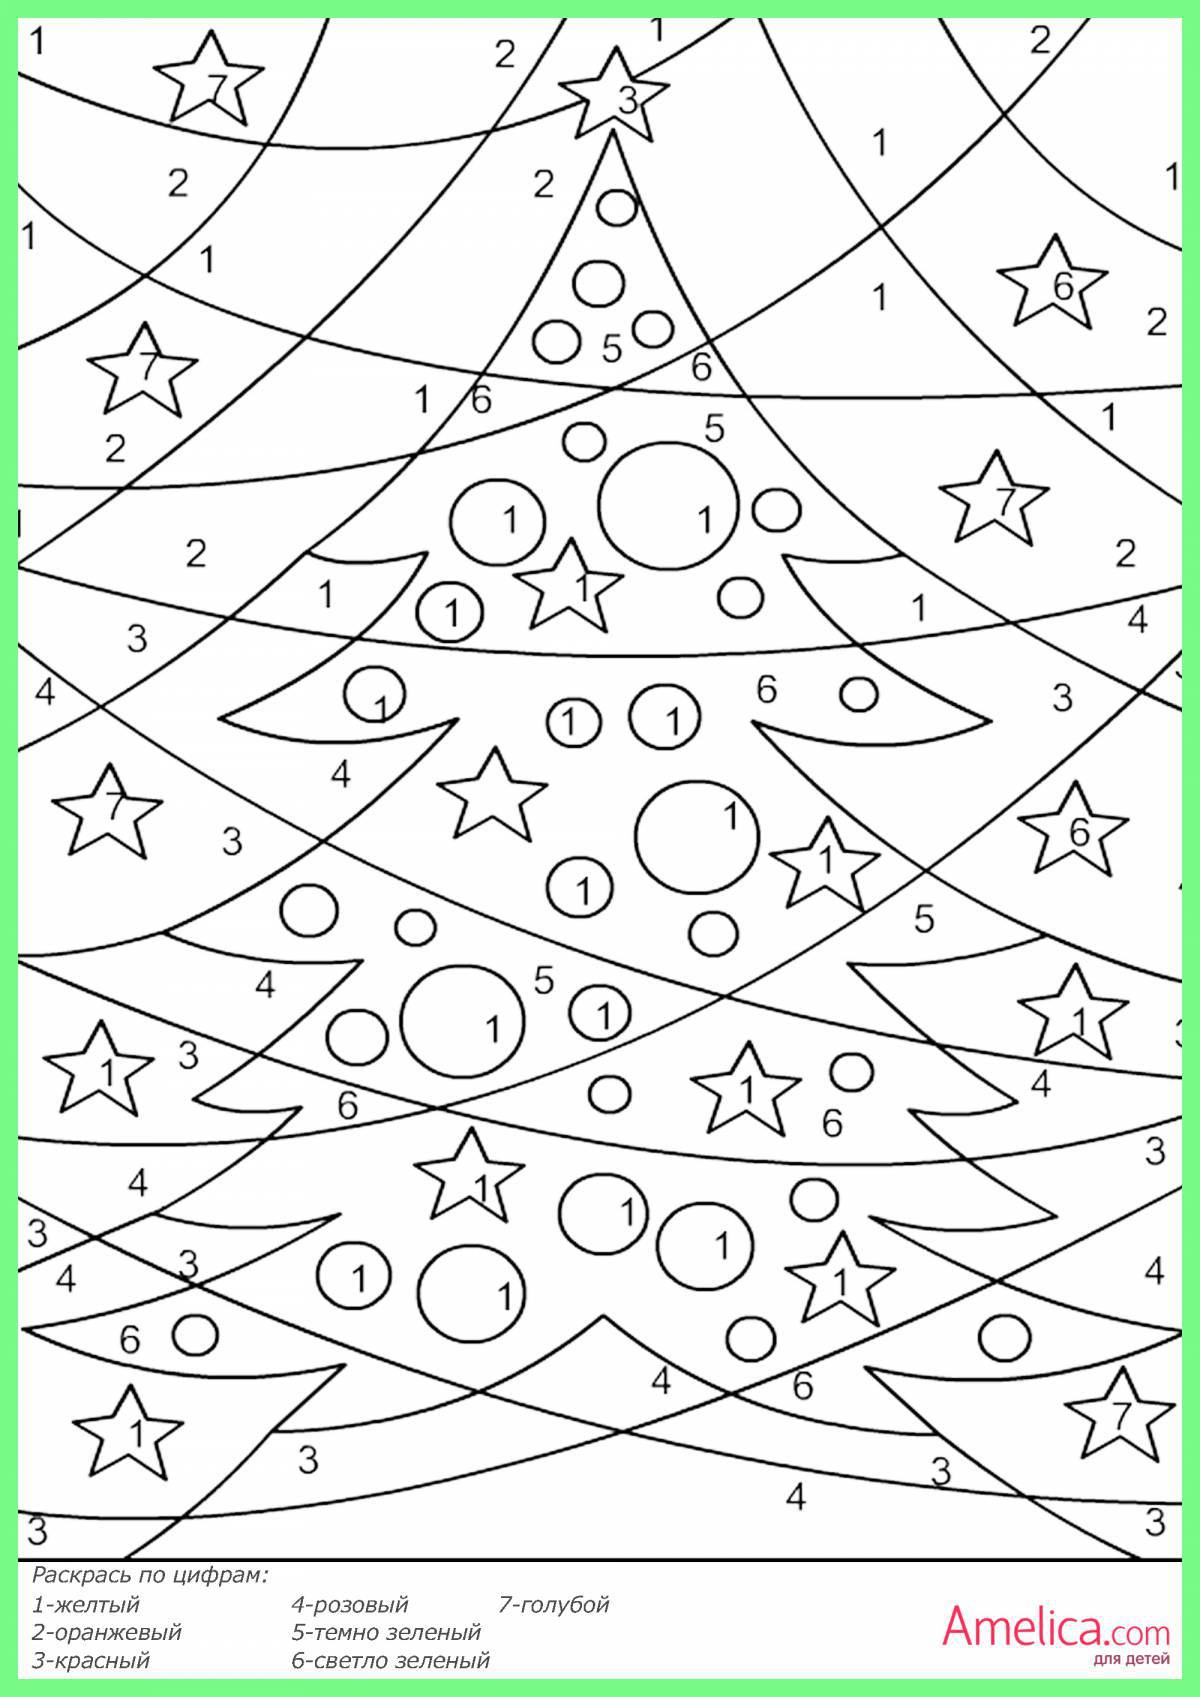 Bright Christmas coloring book for kids 6-7 years old